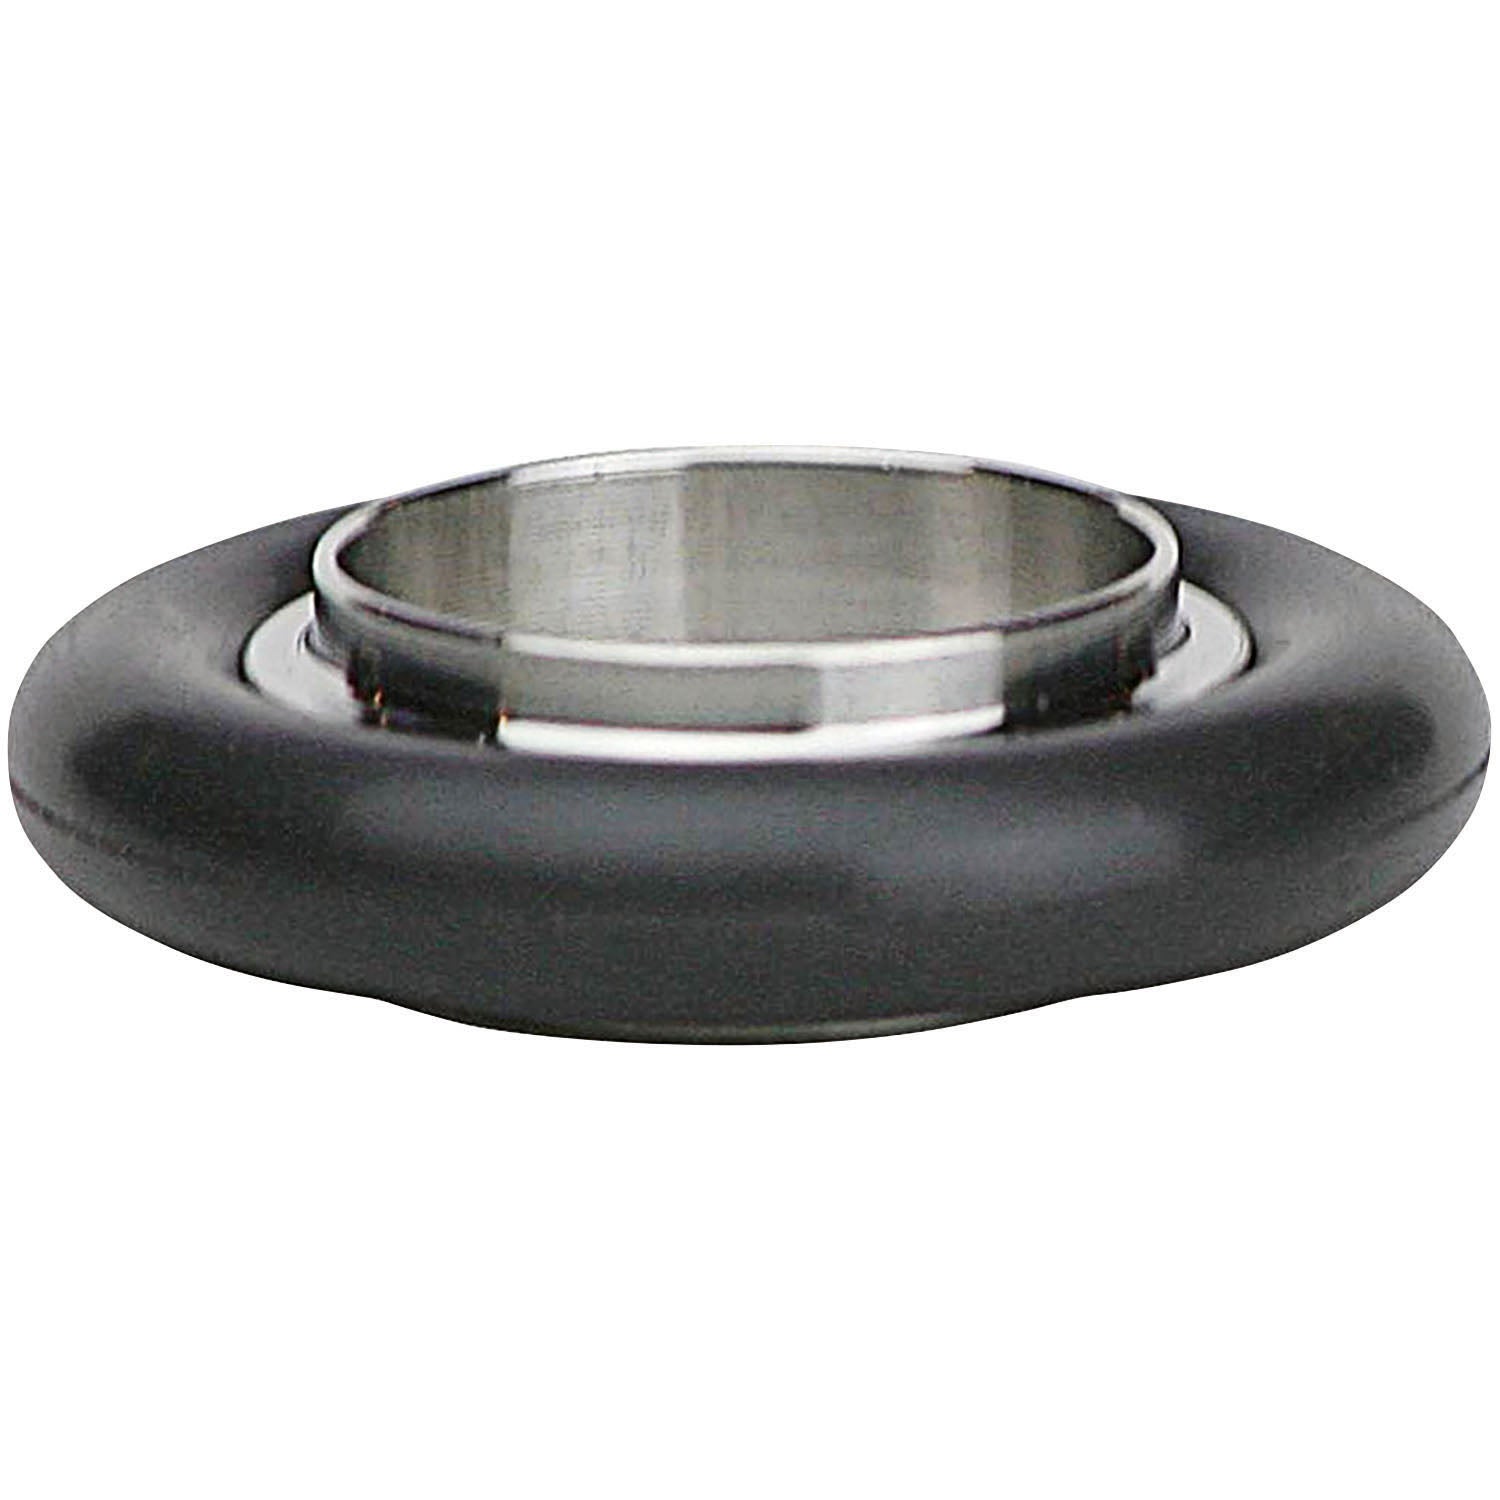 Welch 303103 CENTERING RING ASSEMBLY NW 40